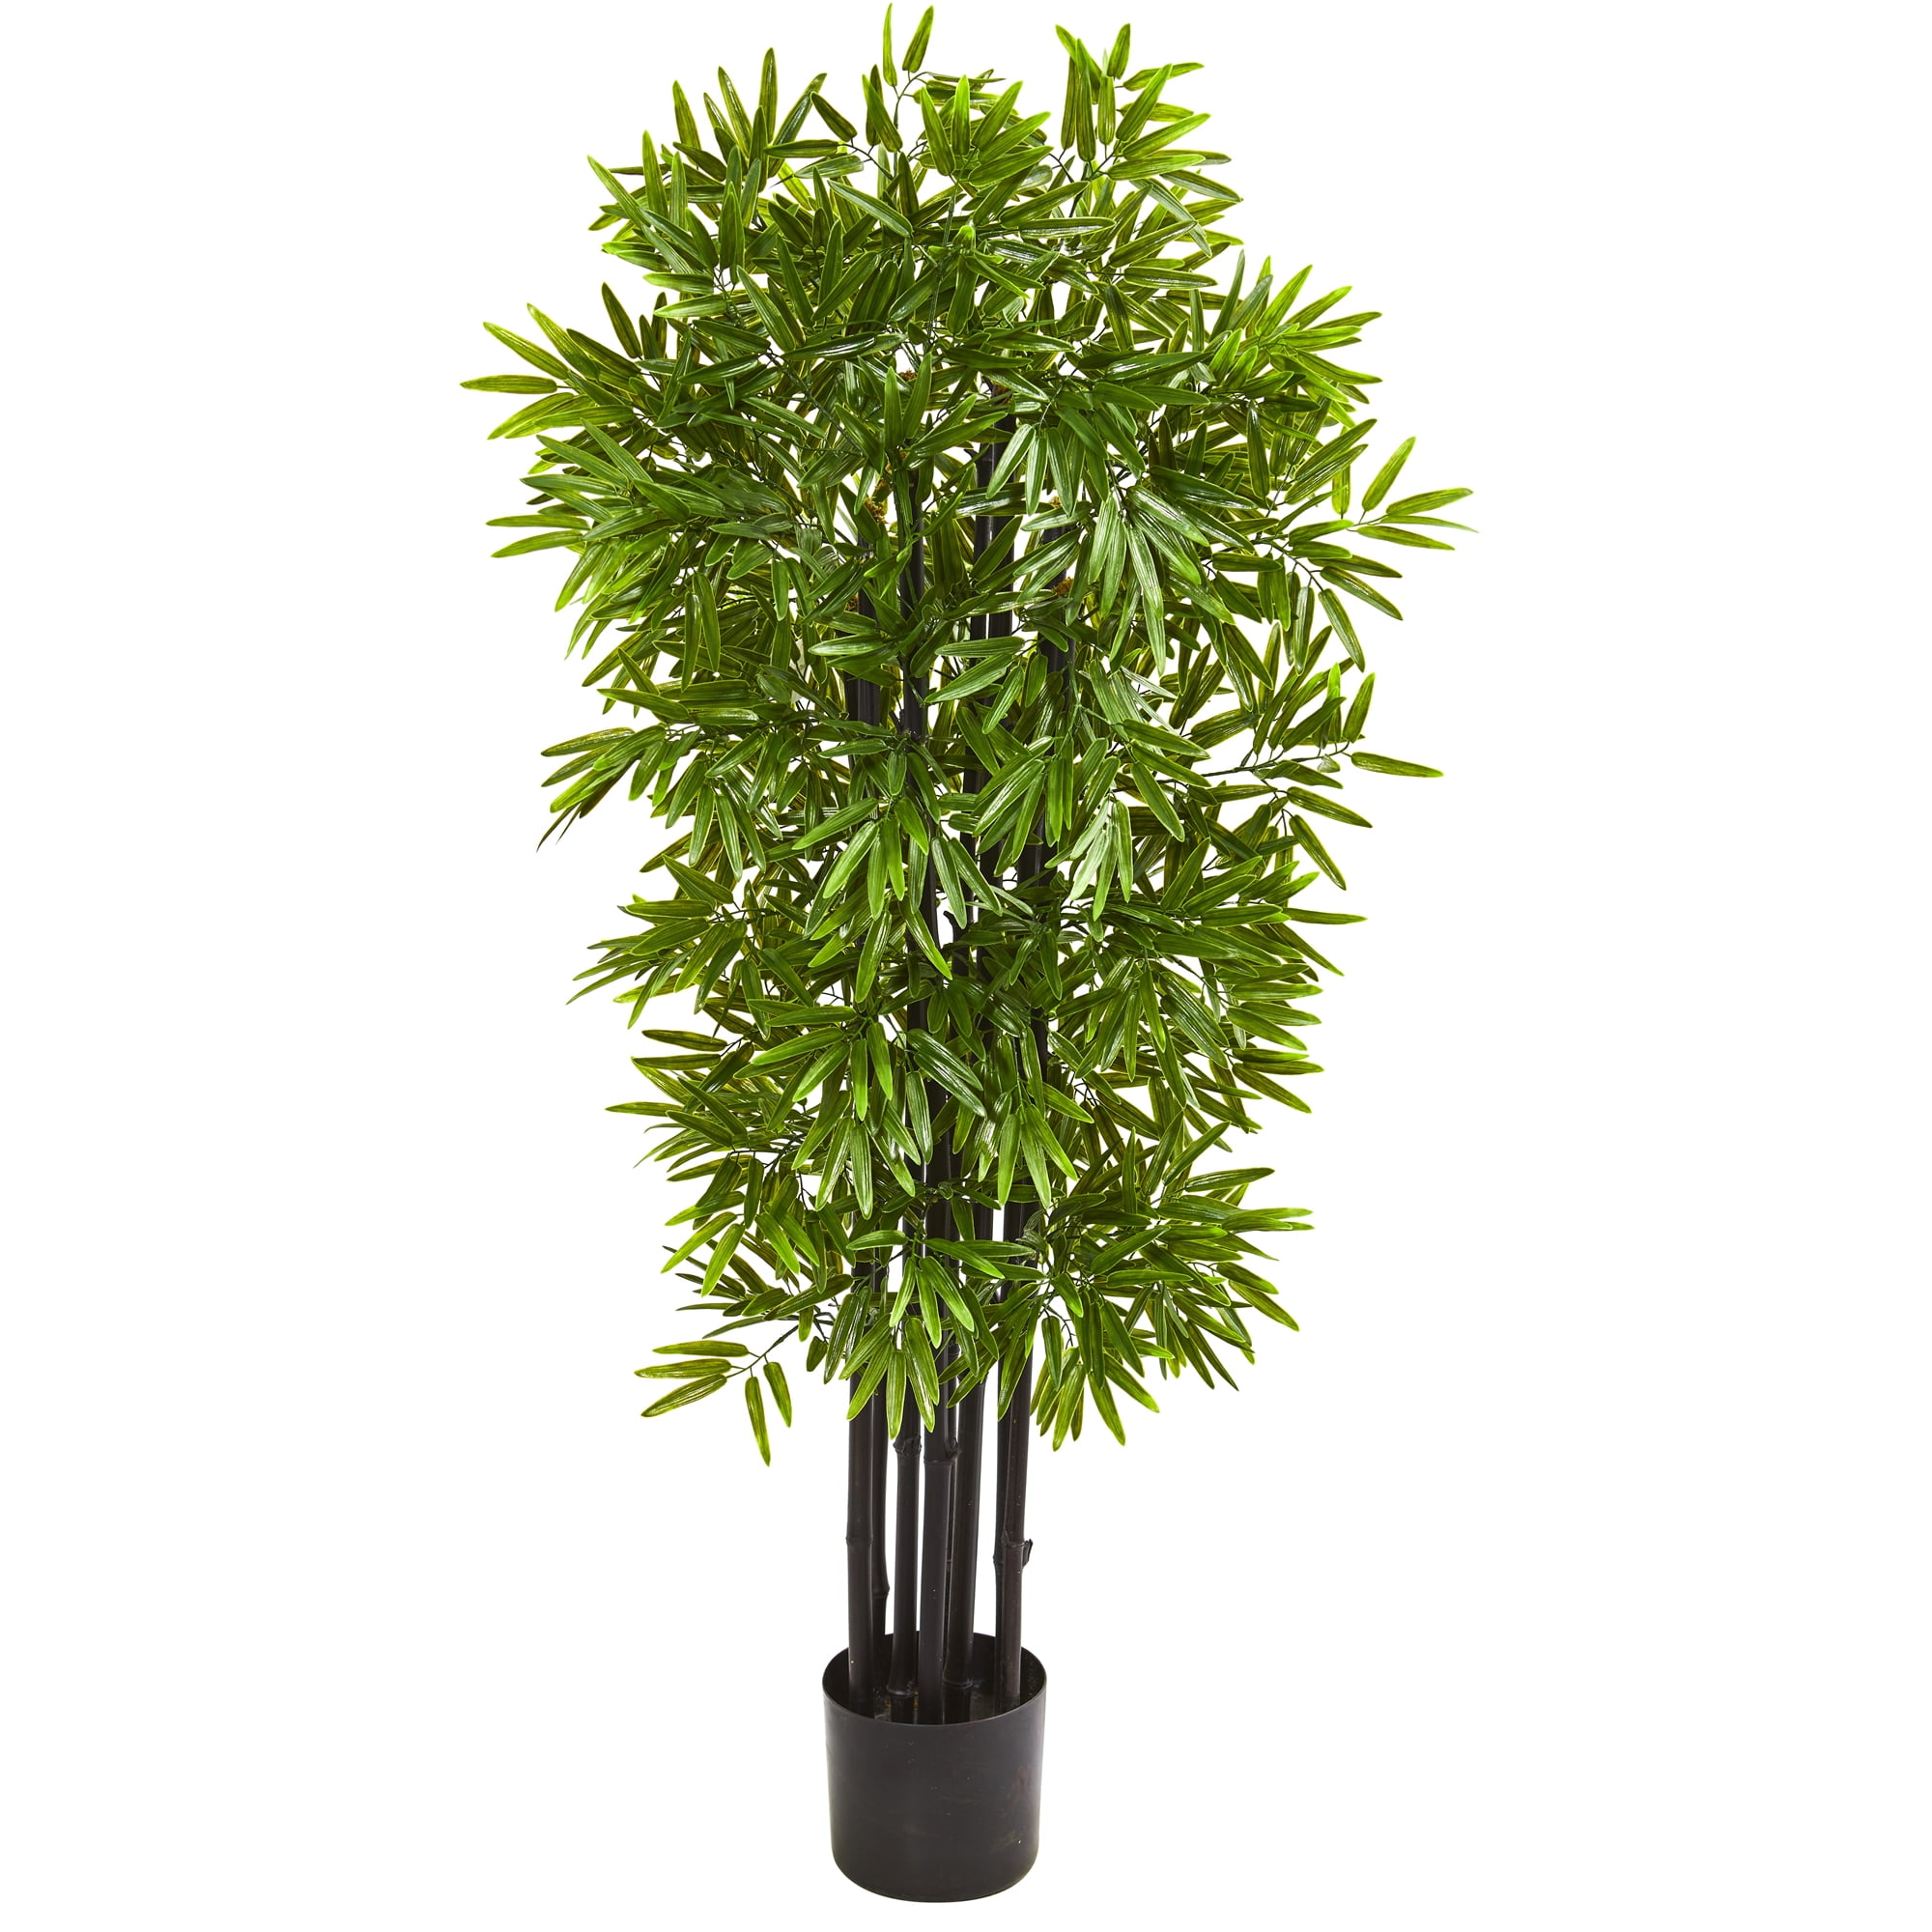 Outdoor Home Decor lastic Artificial Bamboo Leaf Tree Plants Green Indoor